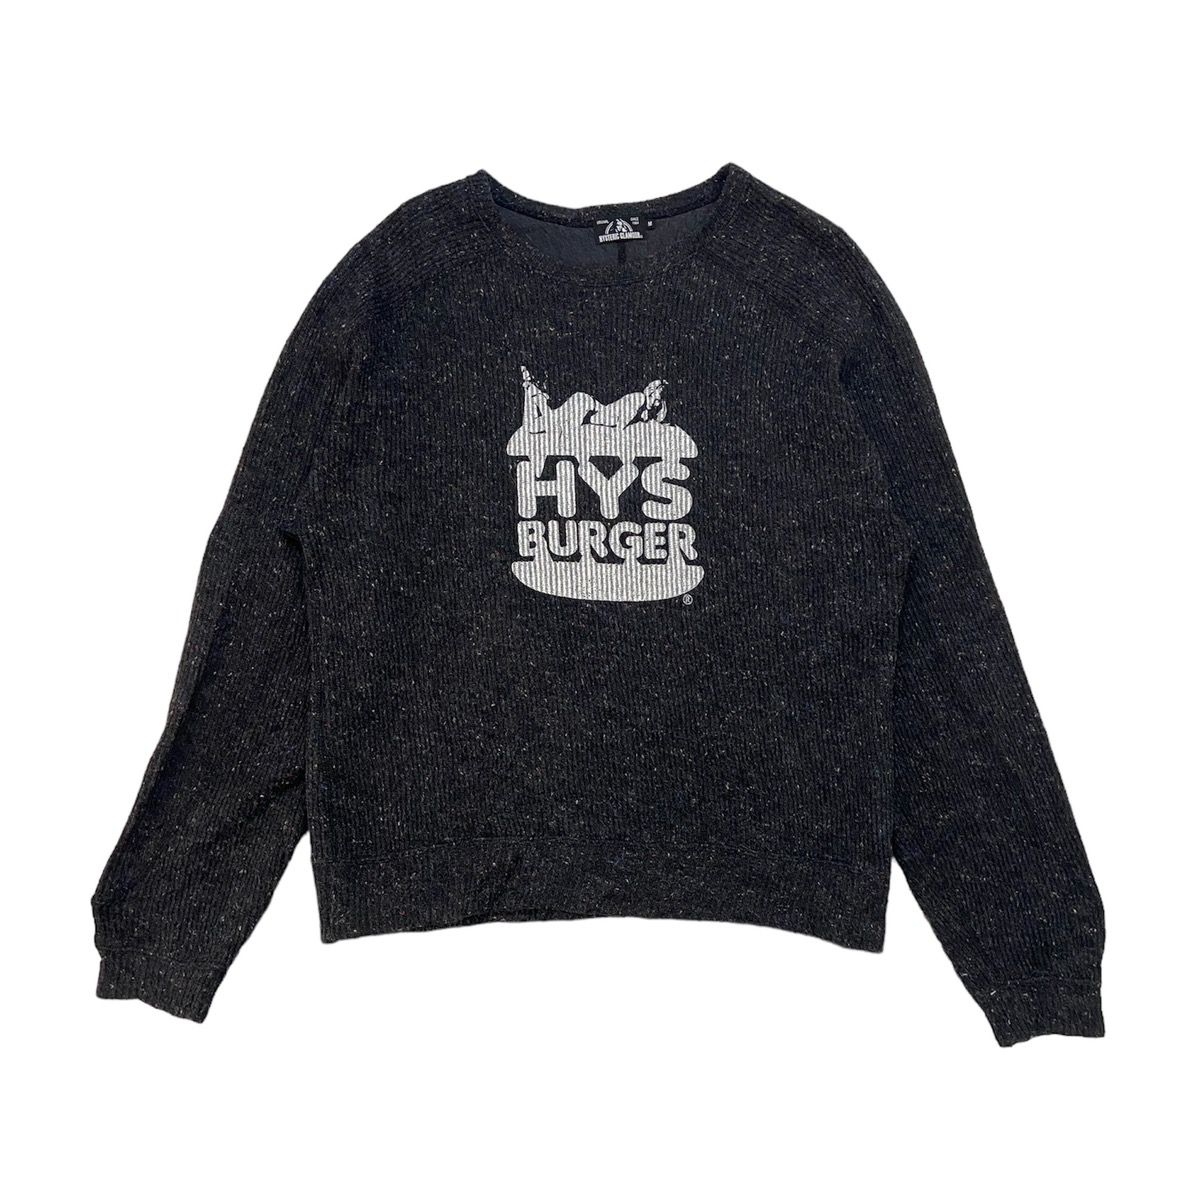 Hys Burger by Hysteric Glamour Knitwear - 1